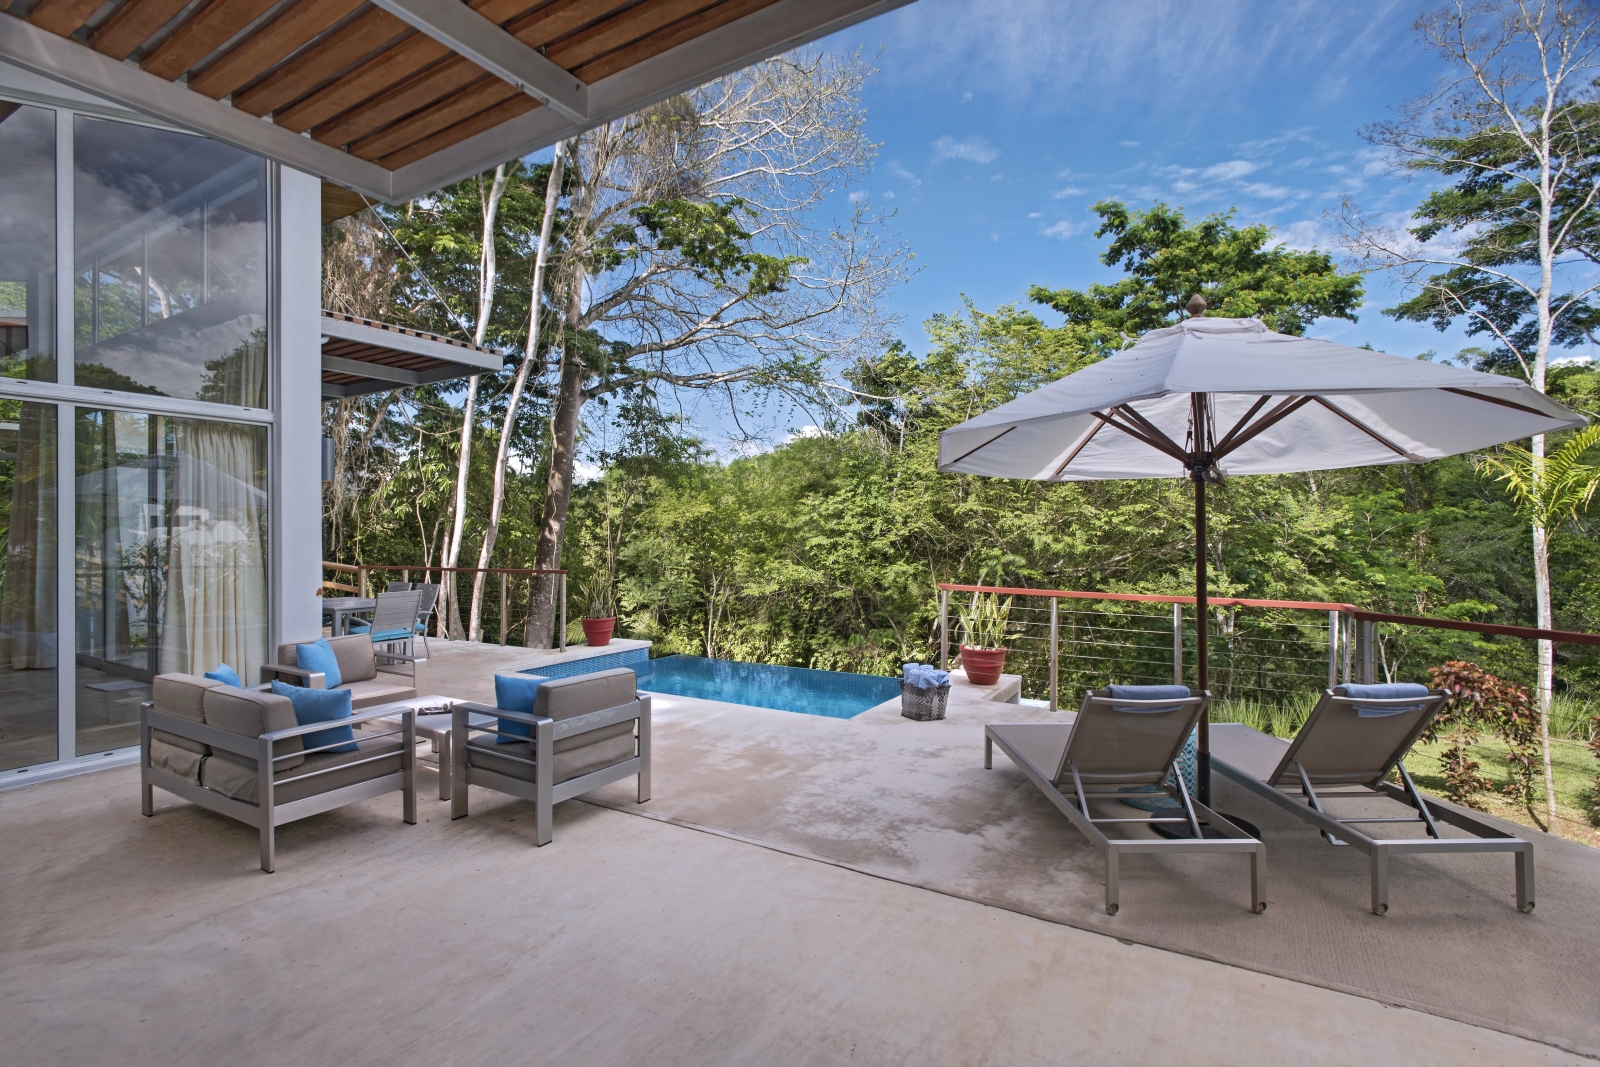 Terrace at The Lodge at Chaa Creek in Belize